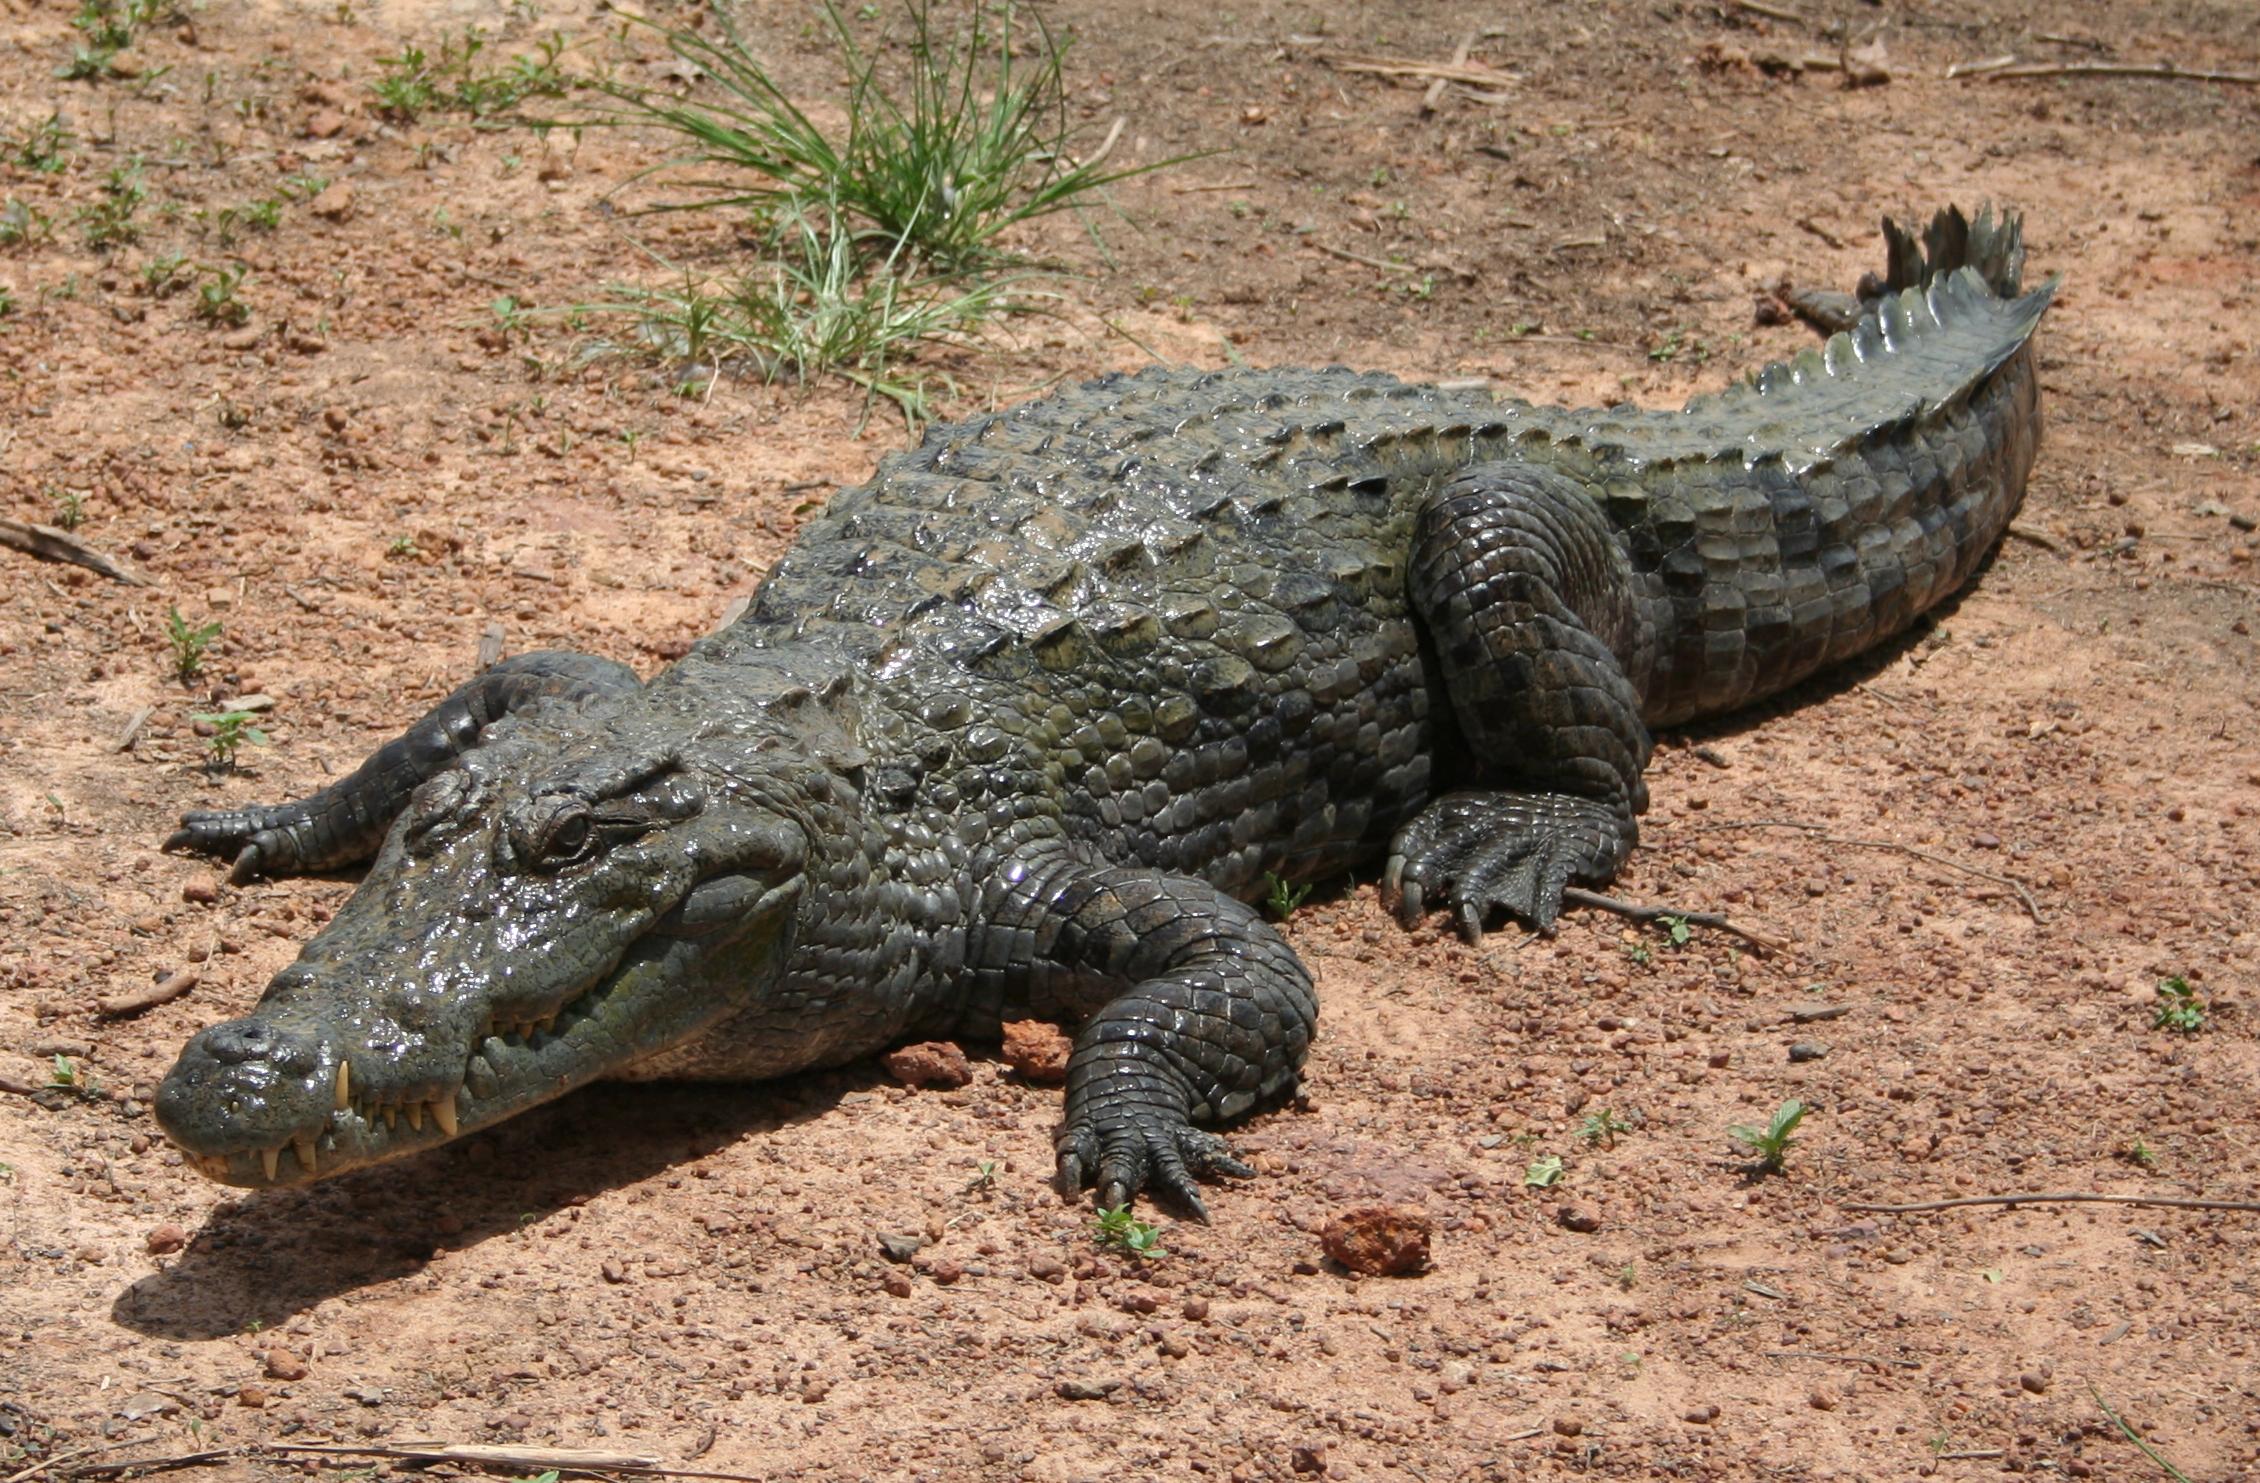 Nigeria’s 79-year-old crocodile worshipped by locals